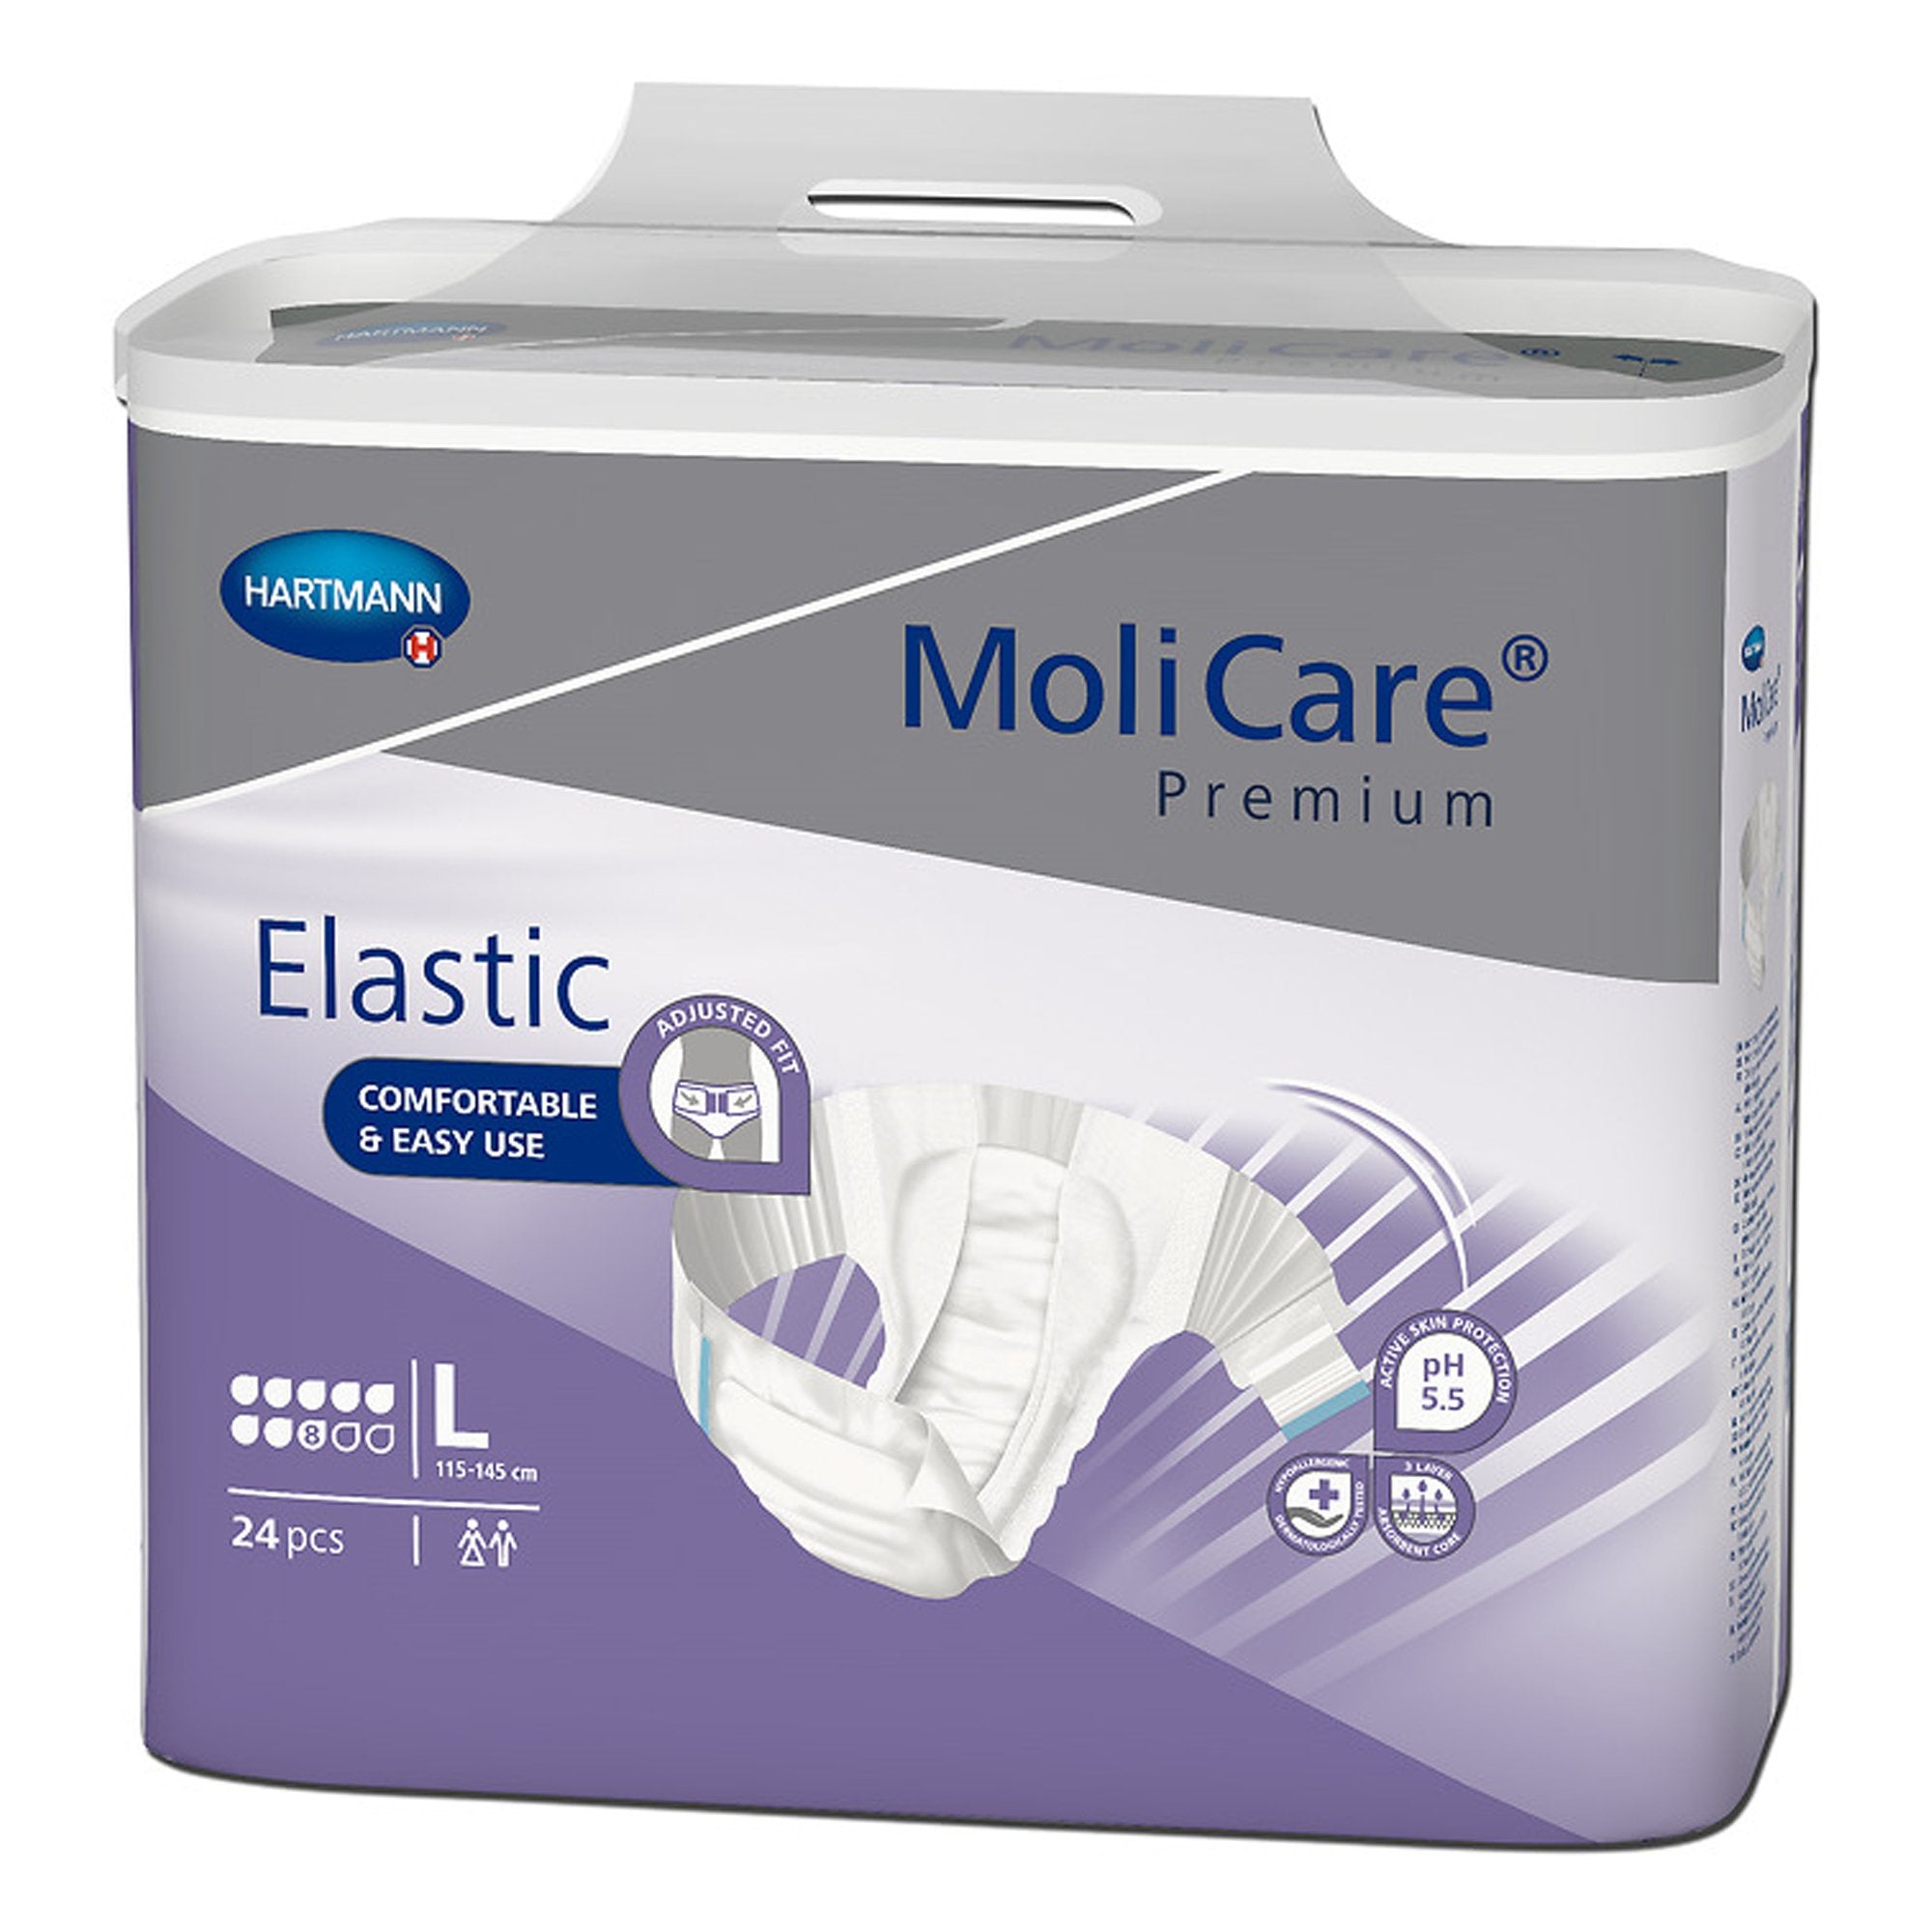 Unisex Adult Incontinence Brief MoliCare® Premium Elastic 8D Large Disposable Heavy Absorbency